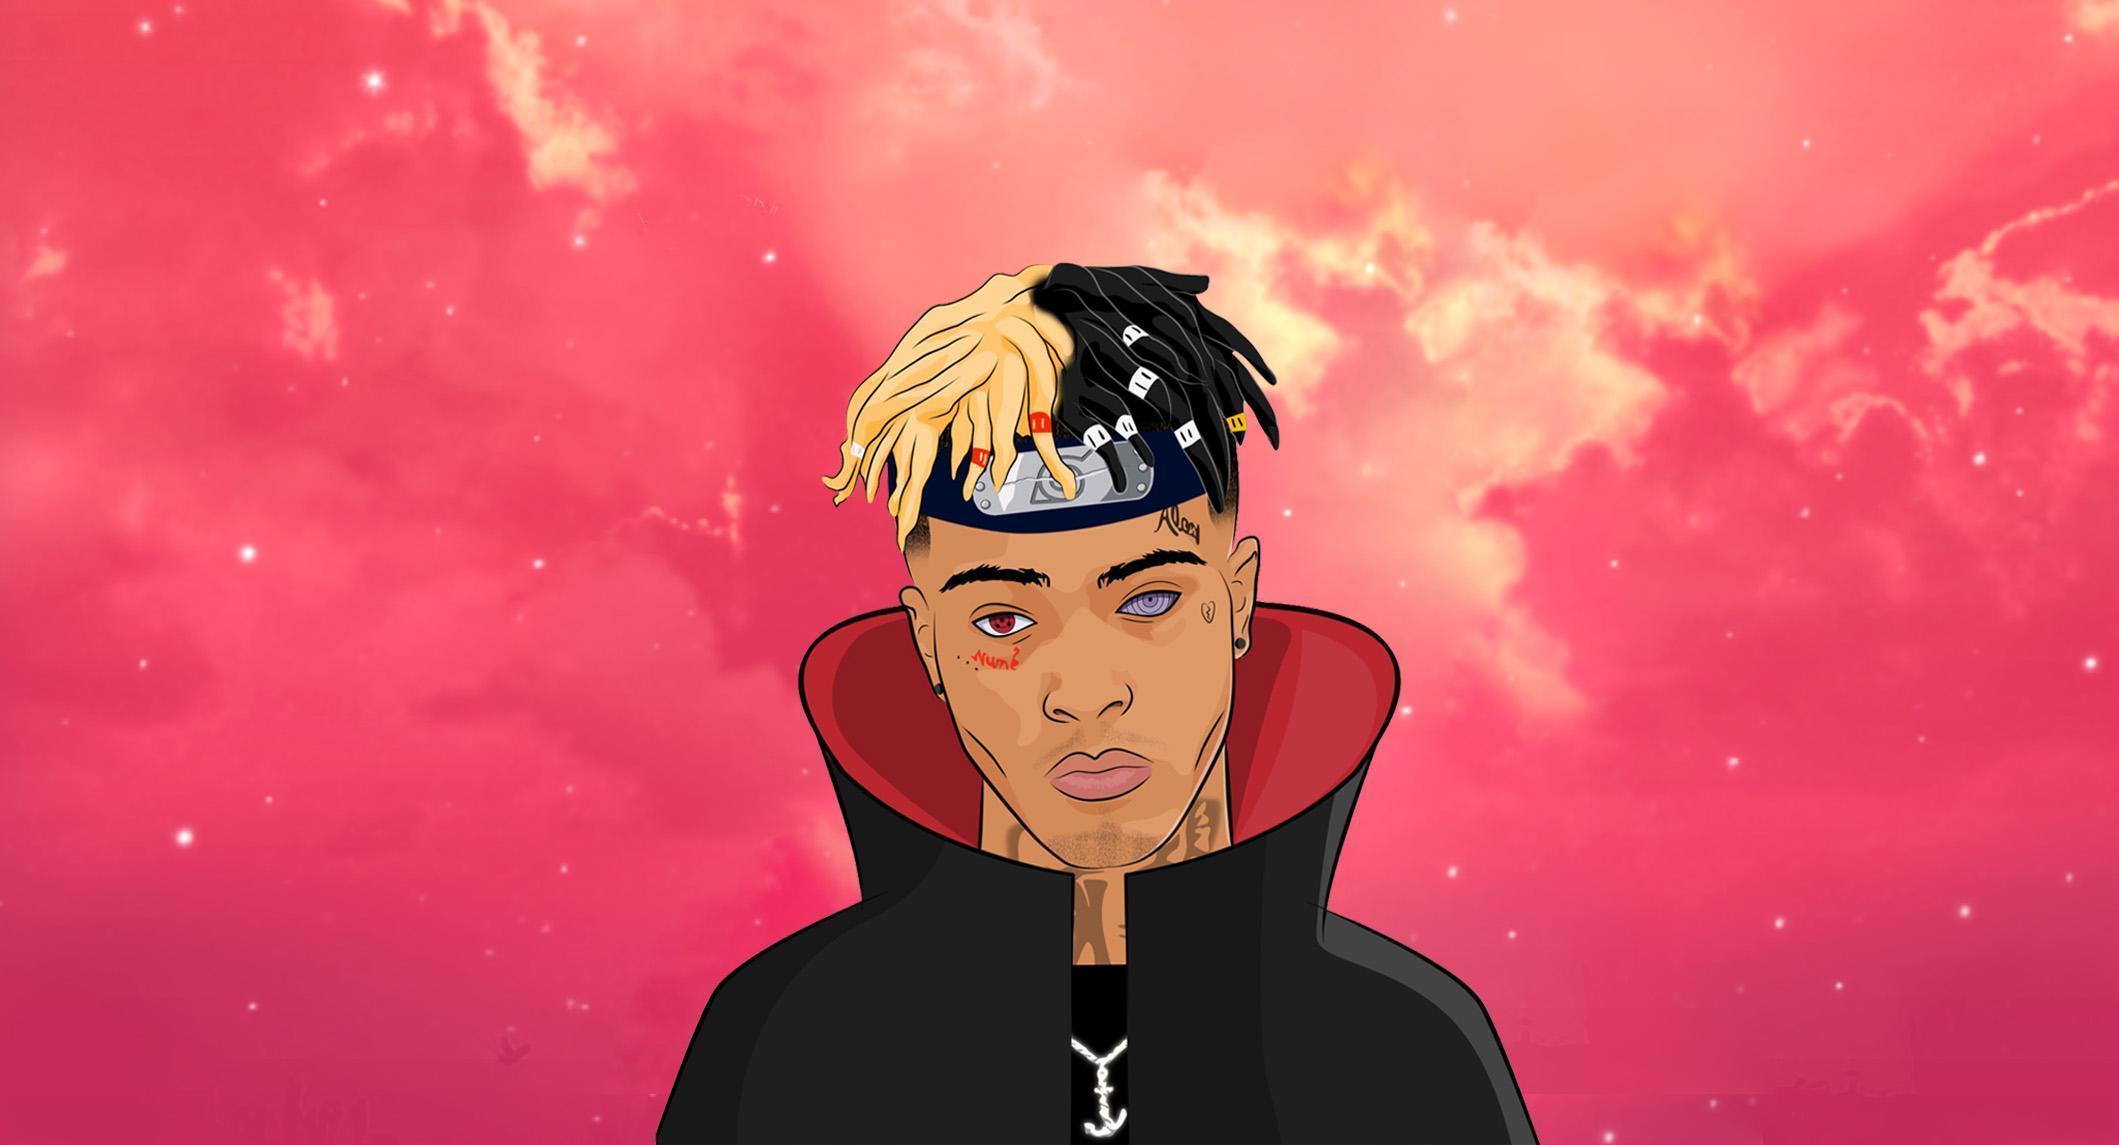 A cartoon character with an afro hairstyle - XXXTentacion